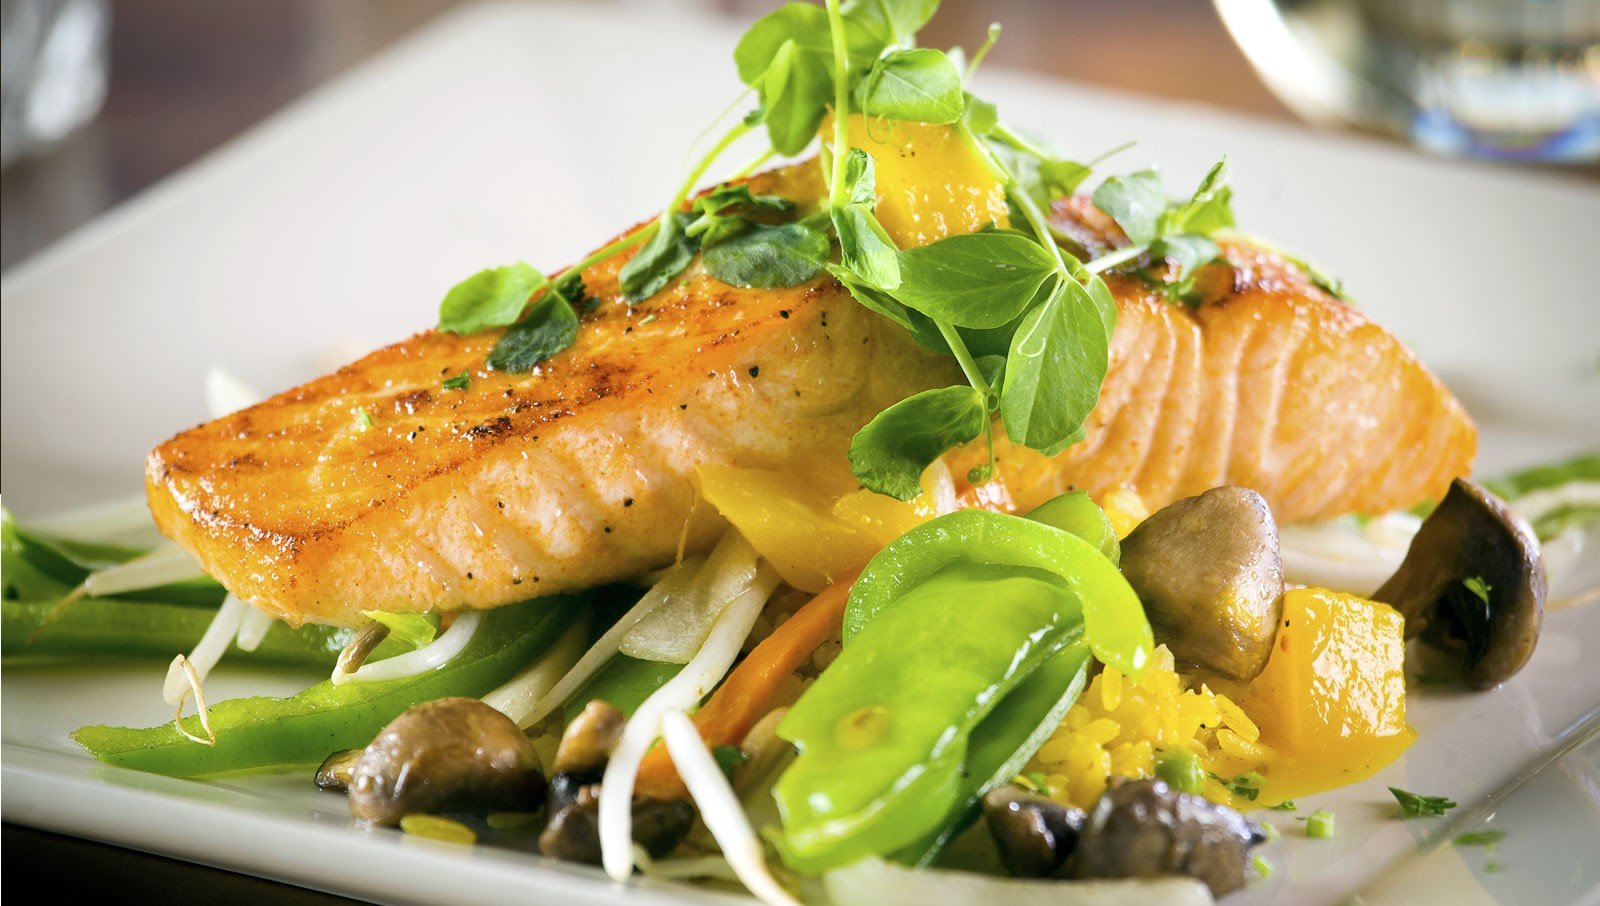 Enjoy Salmon on this Healthy Meal Plan for Weight Loss